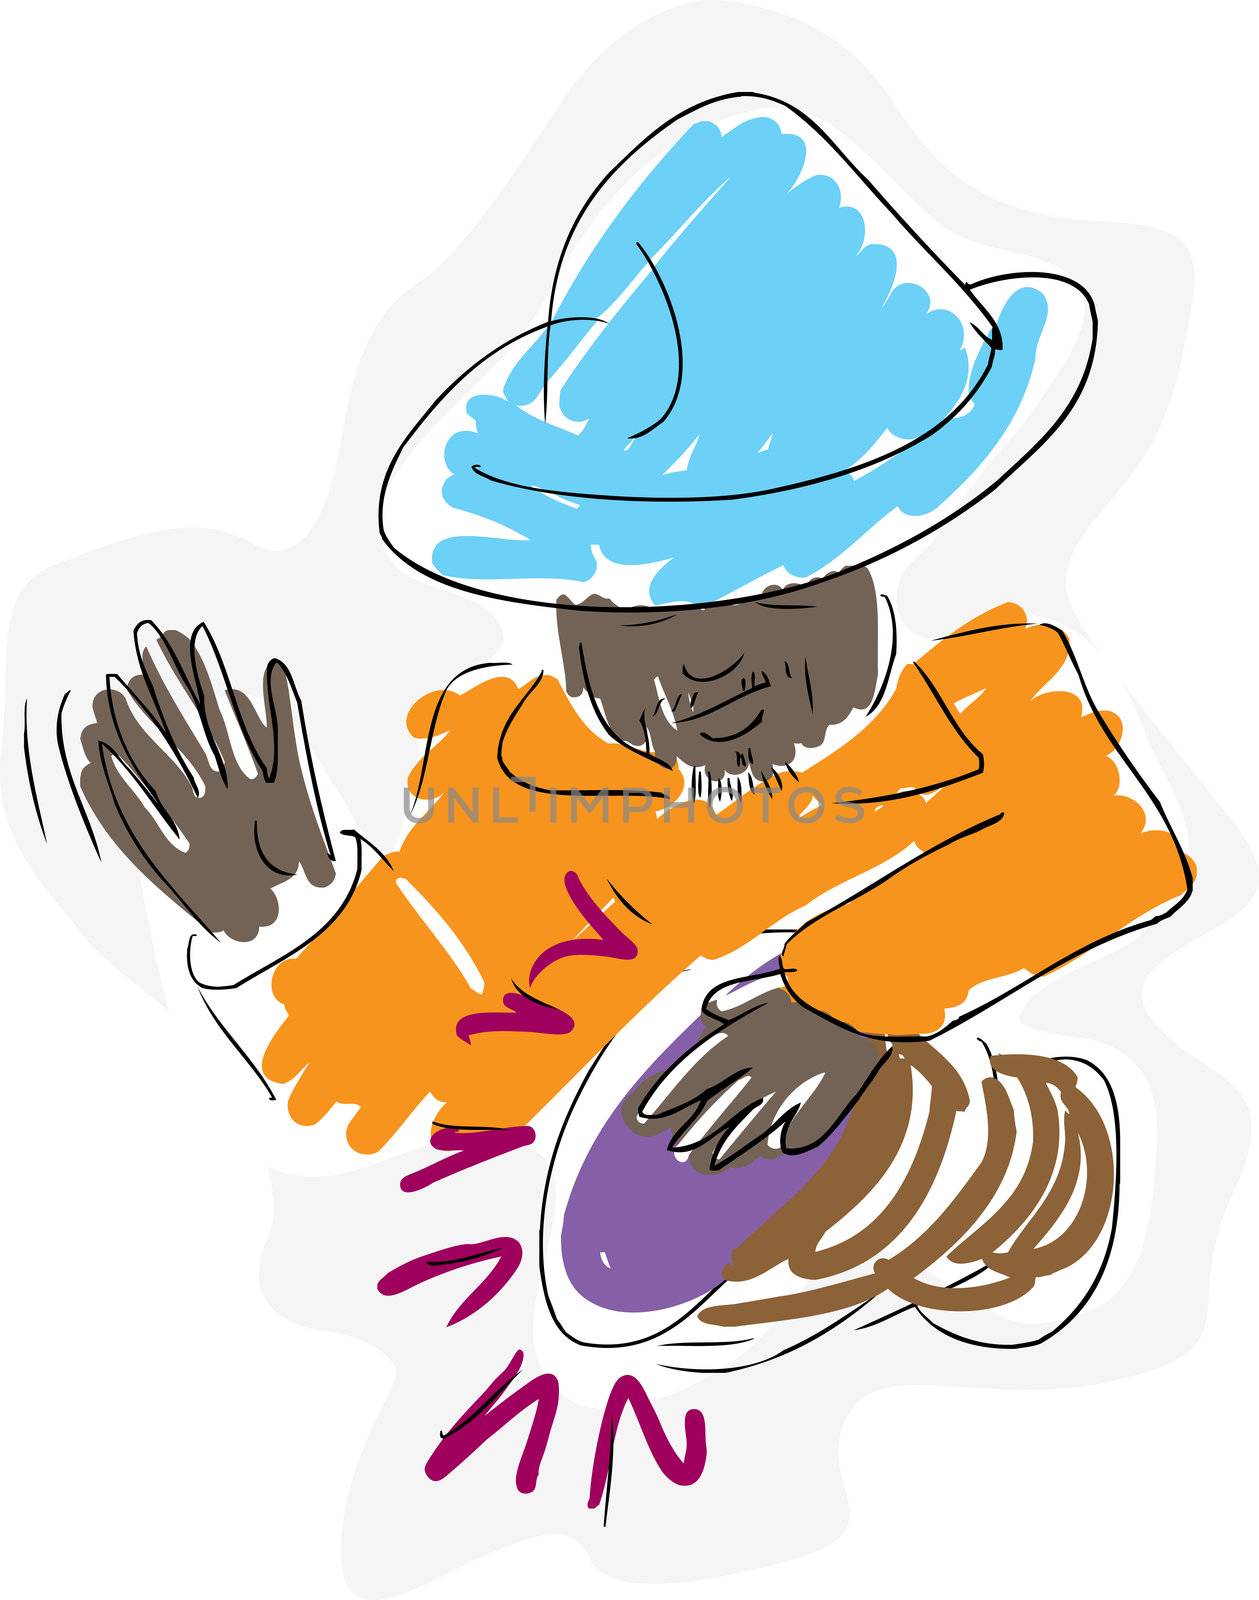 Sketch of an Aborigine man playing a drum over white background